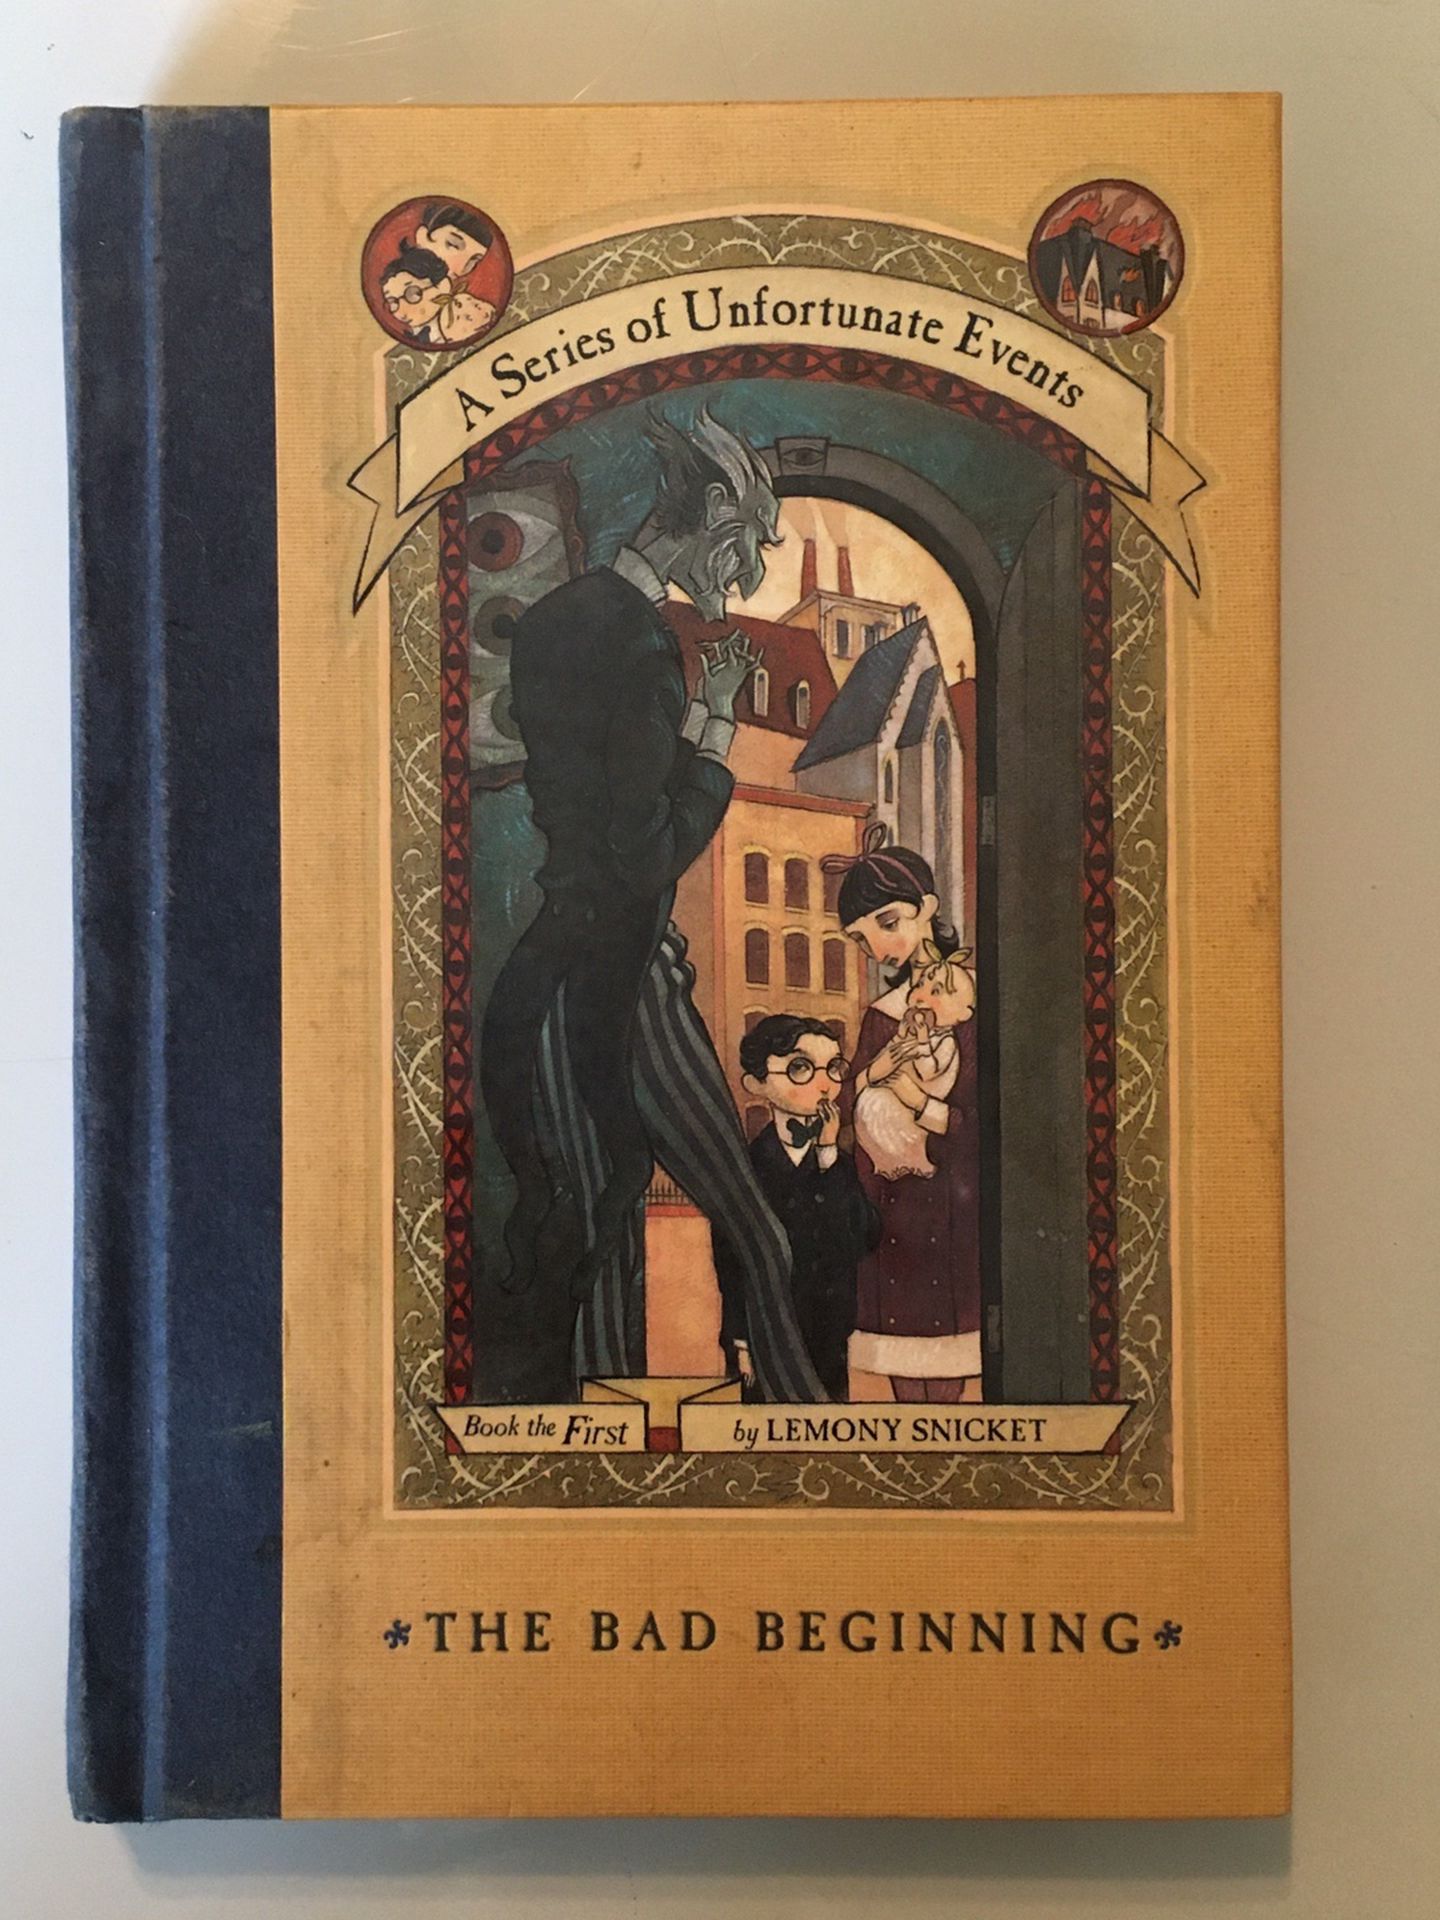 Lemony Snicket’s (A Series Of Unfortunate Events) #1 : The Bad Beginning